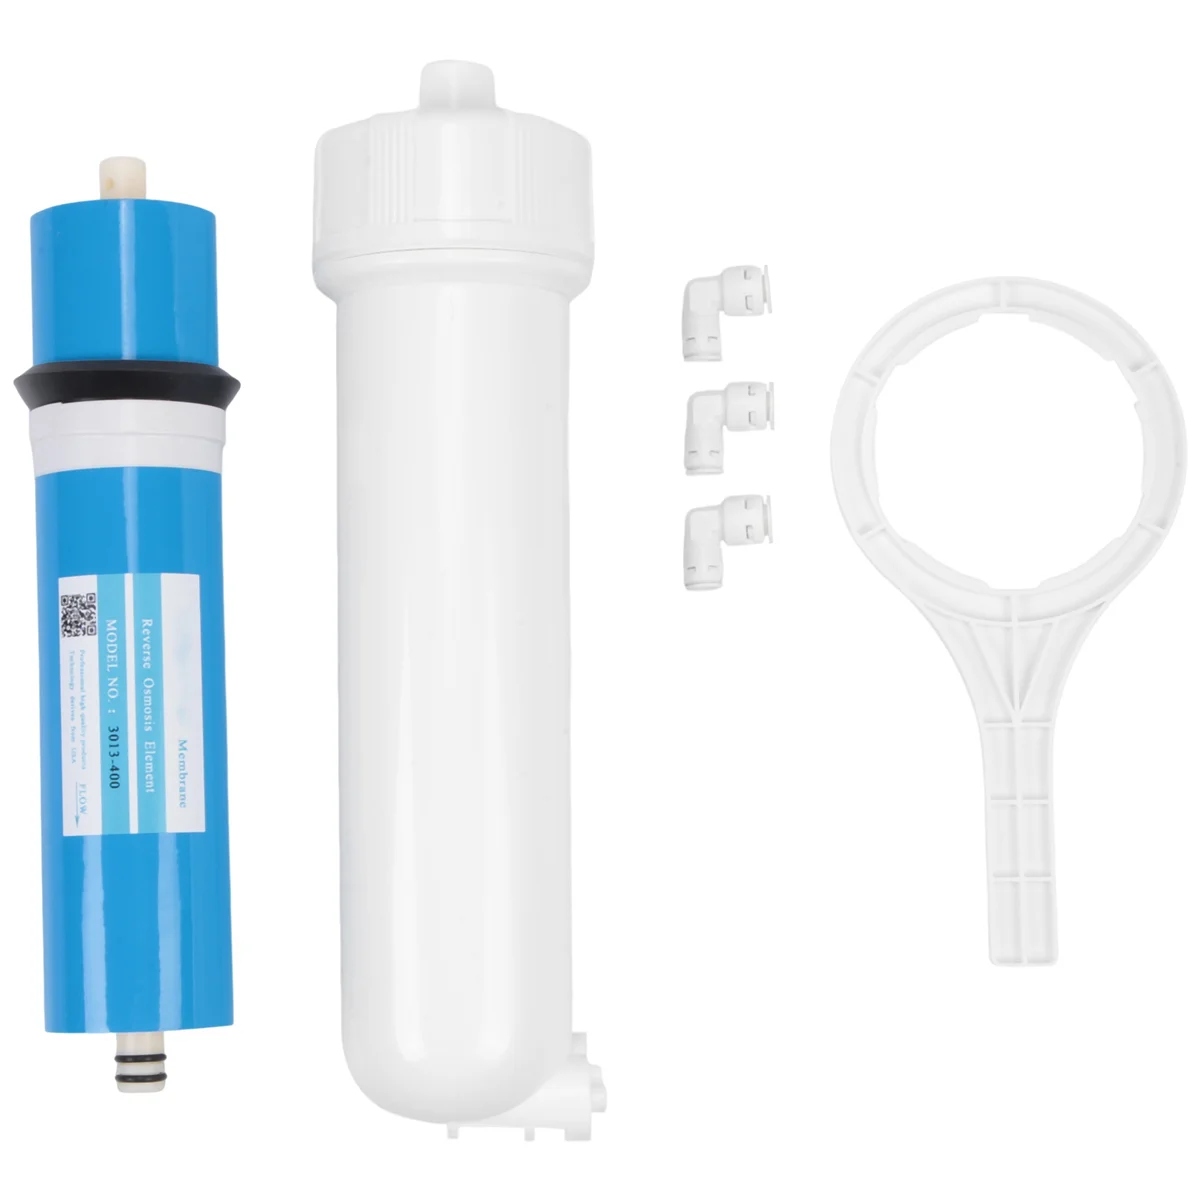 

400 GPD RO Reverse Osmosis Membrane,1/4inch Quick-Connect Fittings,for Under Sink Home Drinking RO Water Filter System